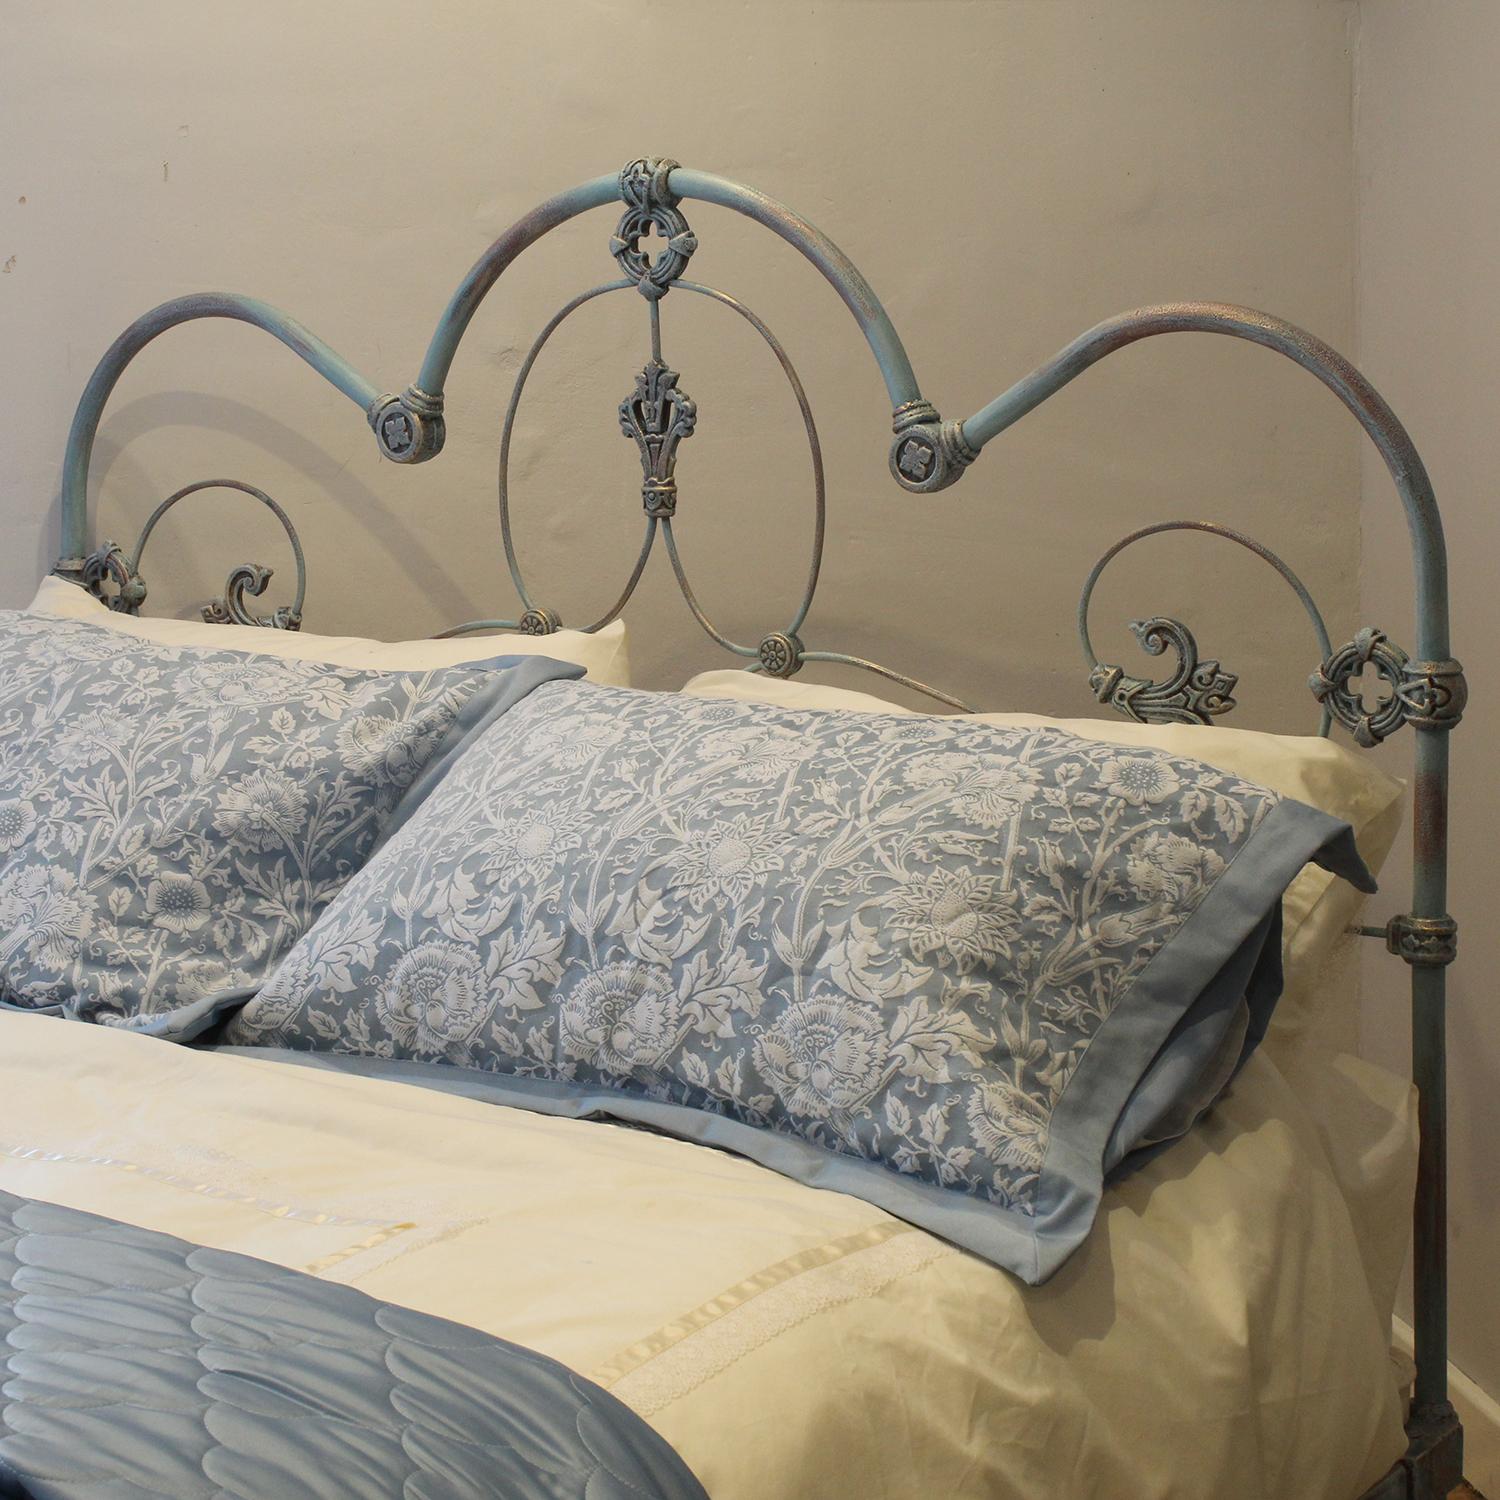 An attractive cast iron antique platform bed with decorative castings and arch design finished in our hand paint effect - Bliue Verdigris.

This bed accepts a UK King or US Queen, 60 inch or 5ft wide, mattress and base.

The price also includes